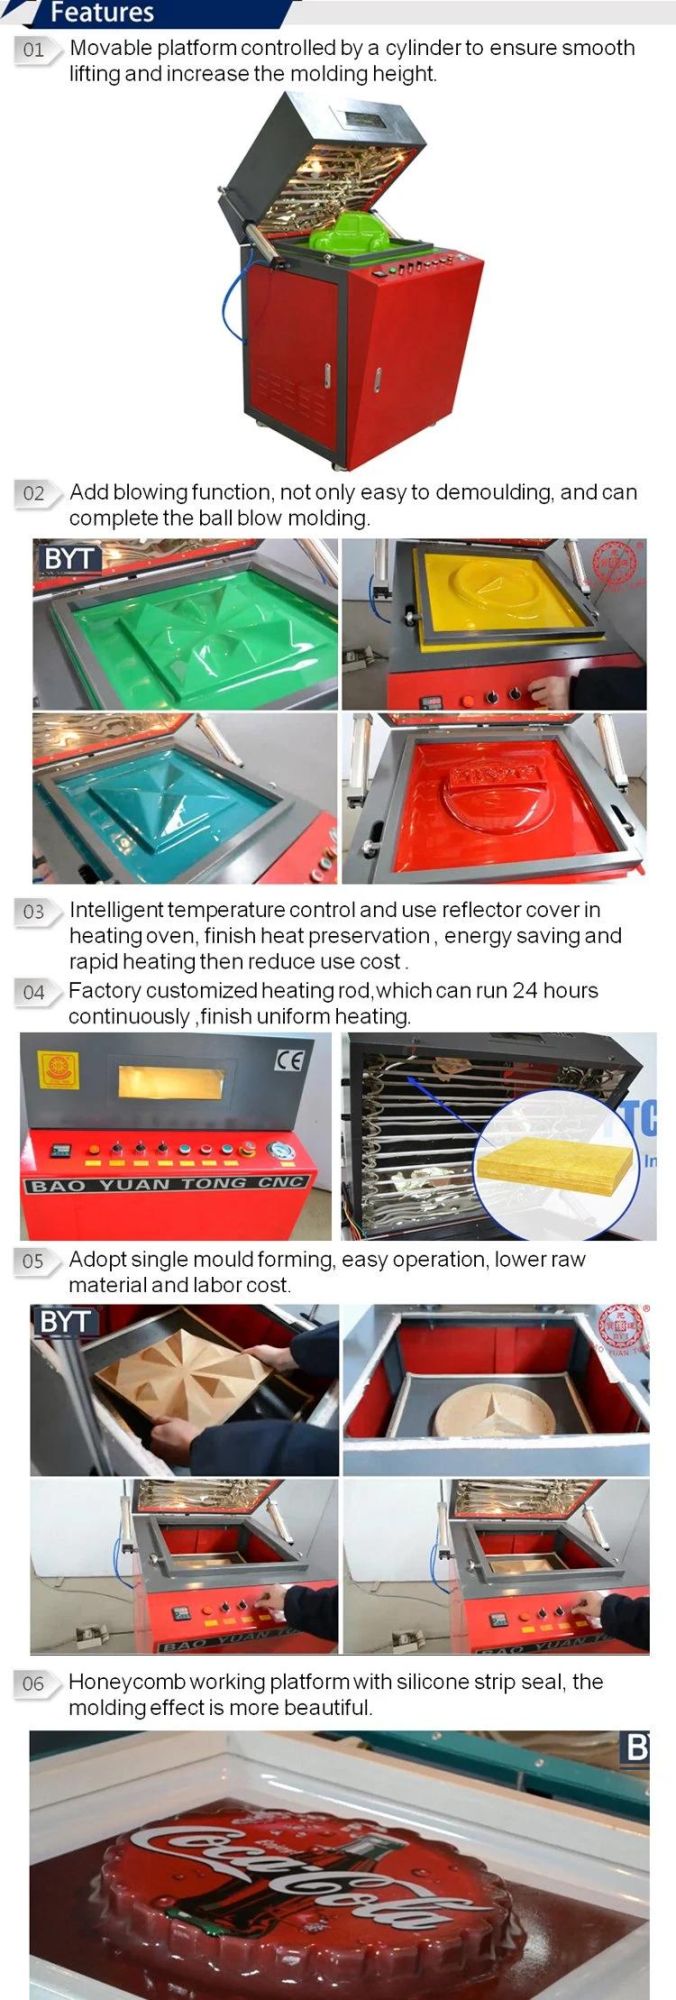 Small Size Vacuum Forming Machine ABS, PVC, PMMA, PC, Pet